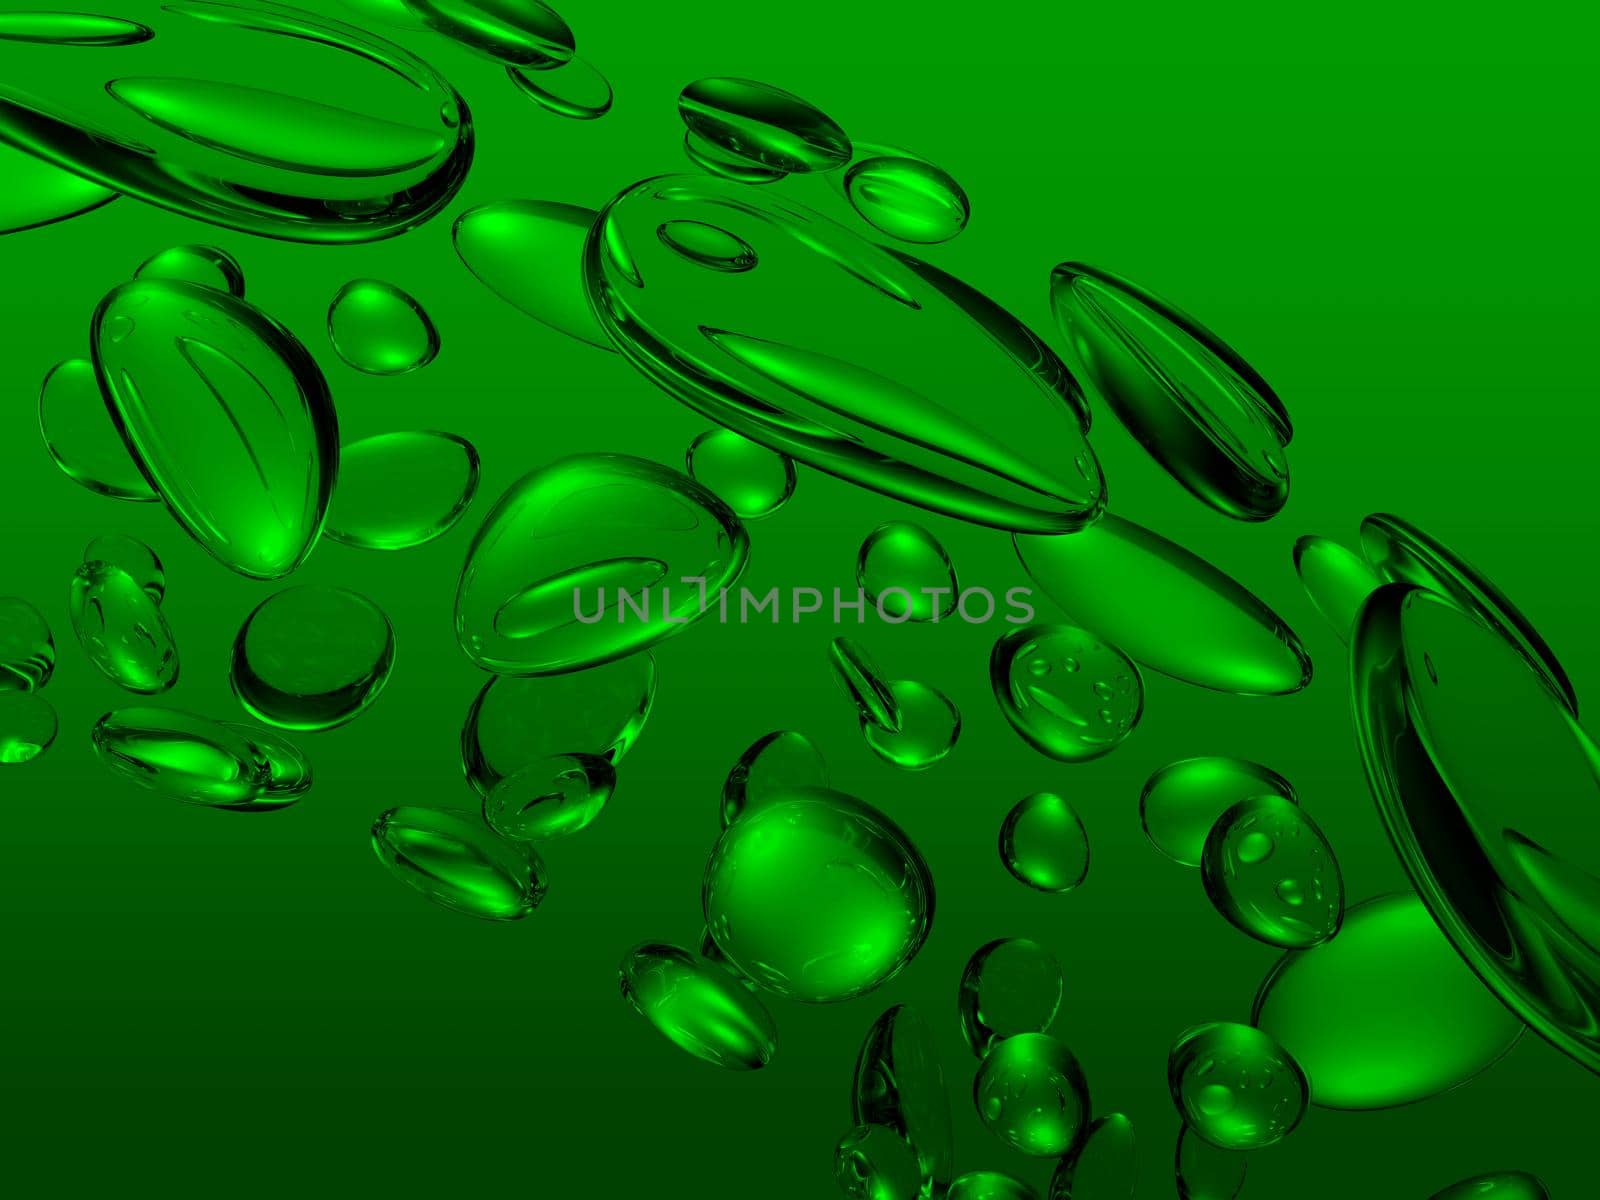 Water droplets on a green background by clusterx